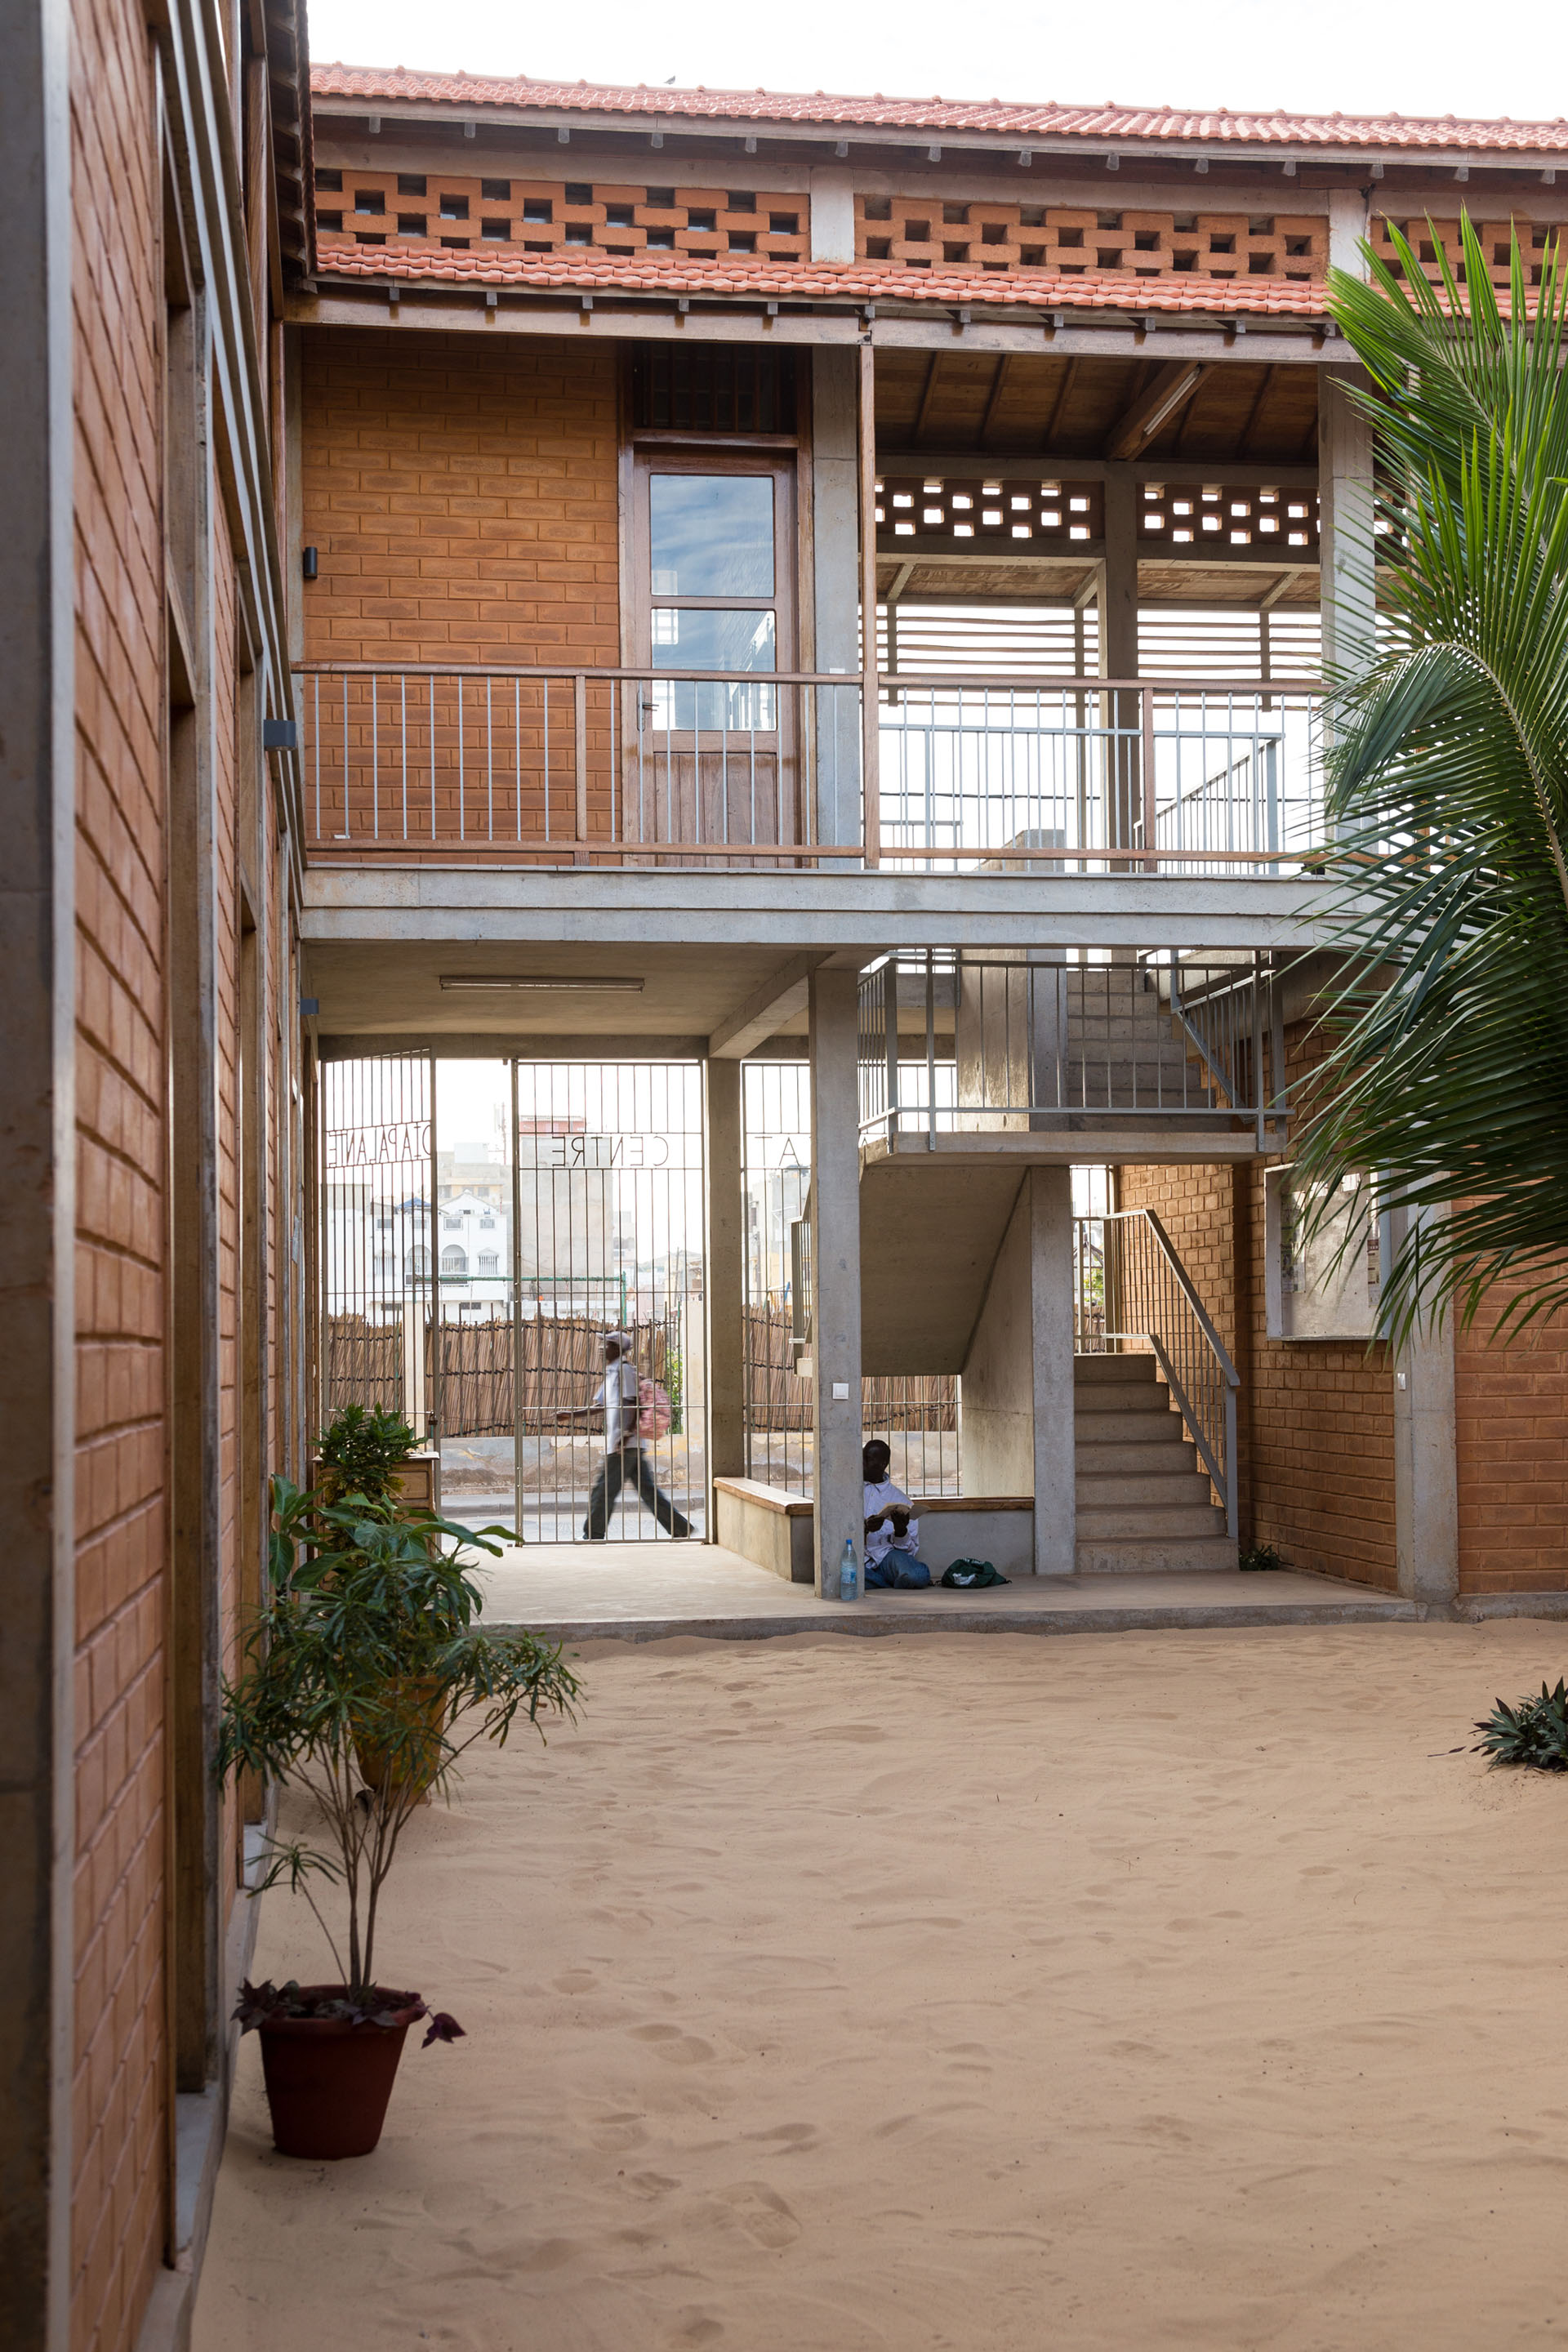 <p>View of the patio 4. Diapalanté - mutual aid and solidarity in Wolof - is a training centre and headquarters for an NGO active in the fields of health, education, heritage, and sustainable construction in Senegal.</p>